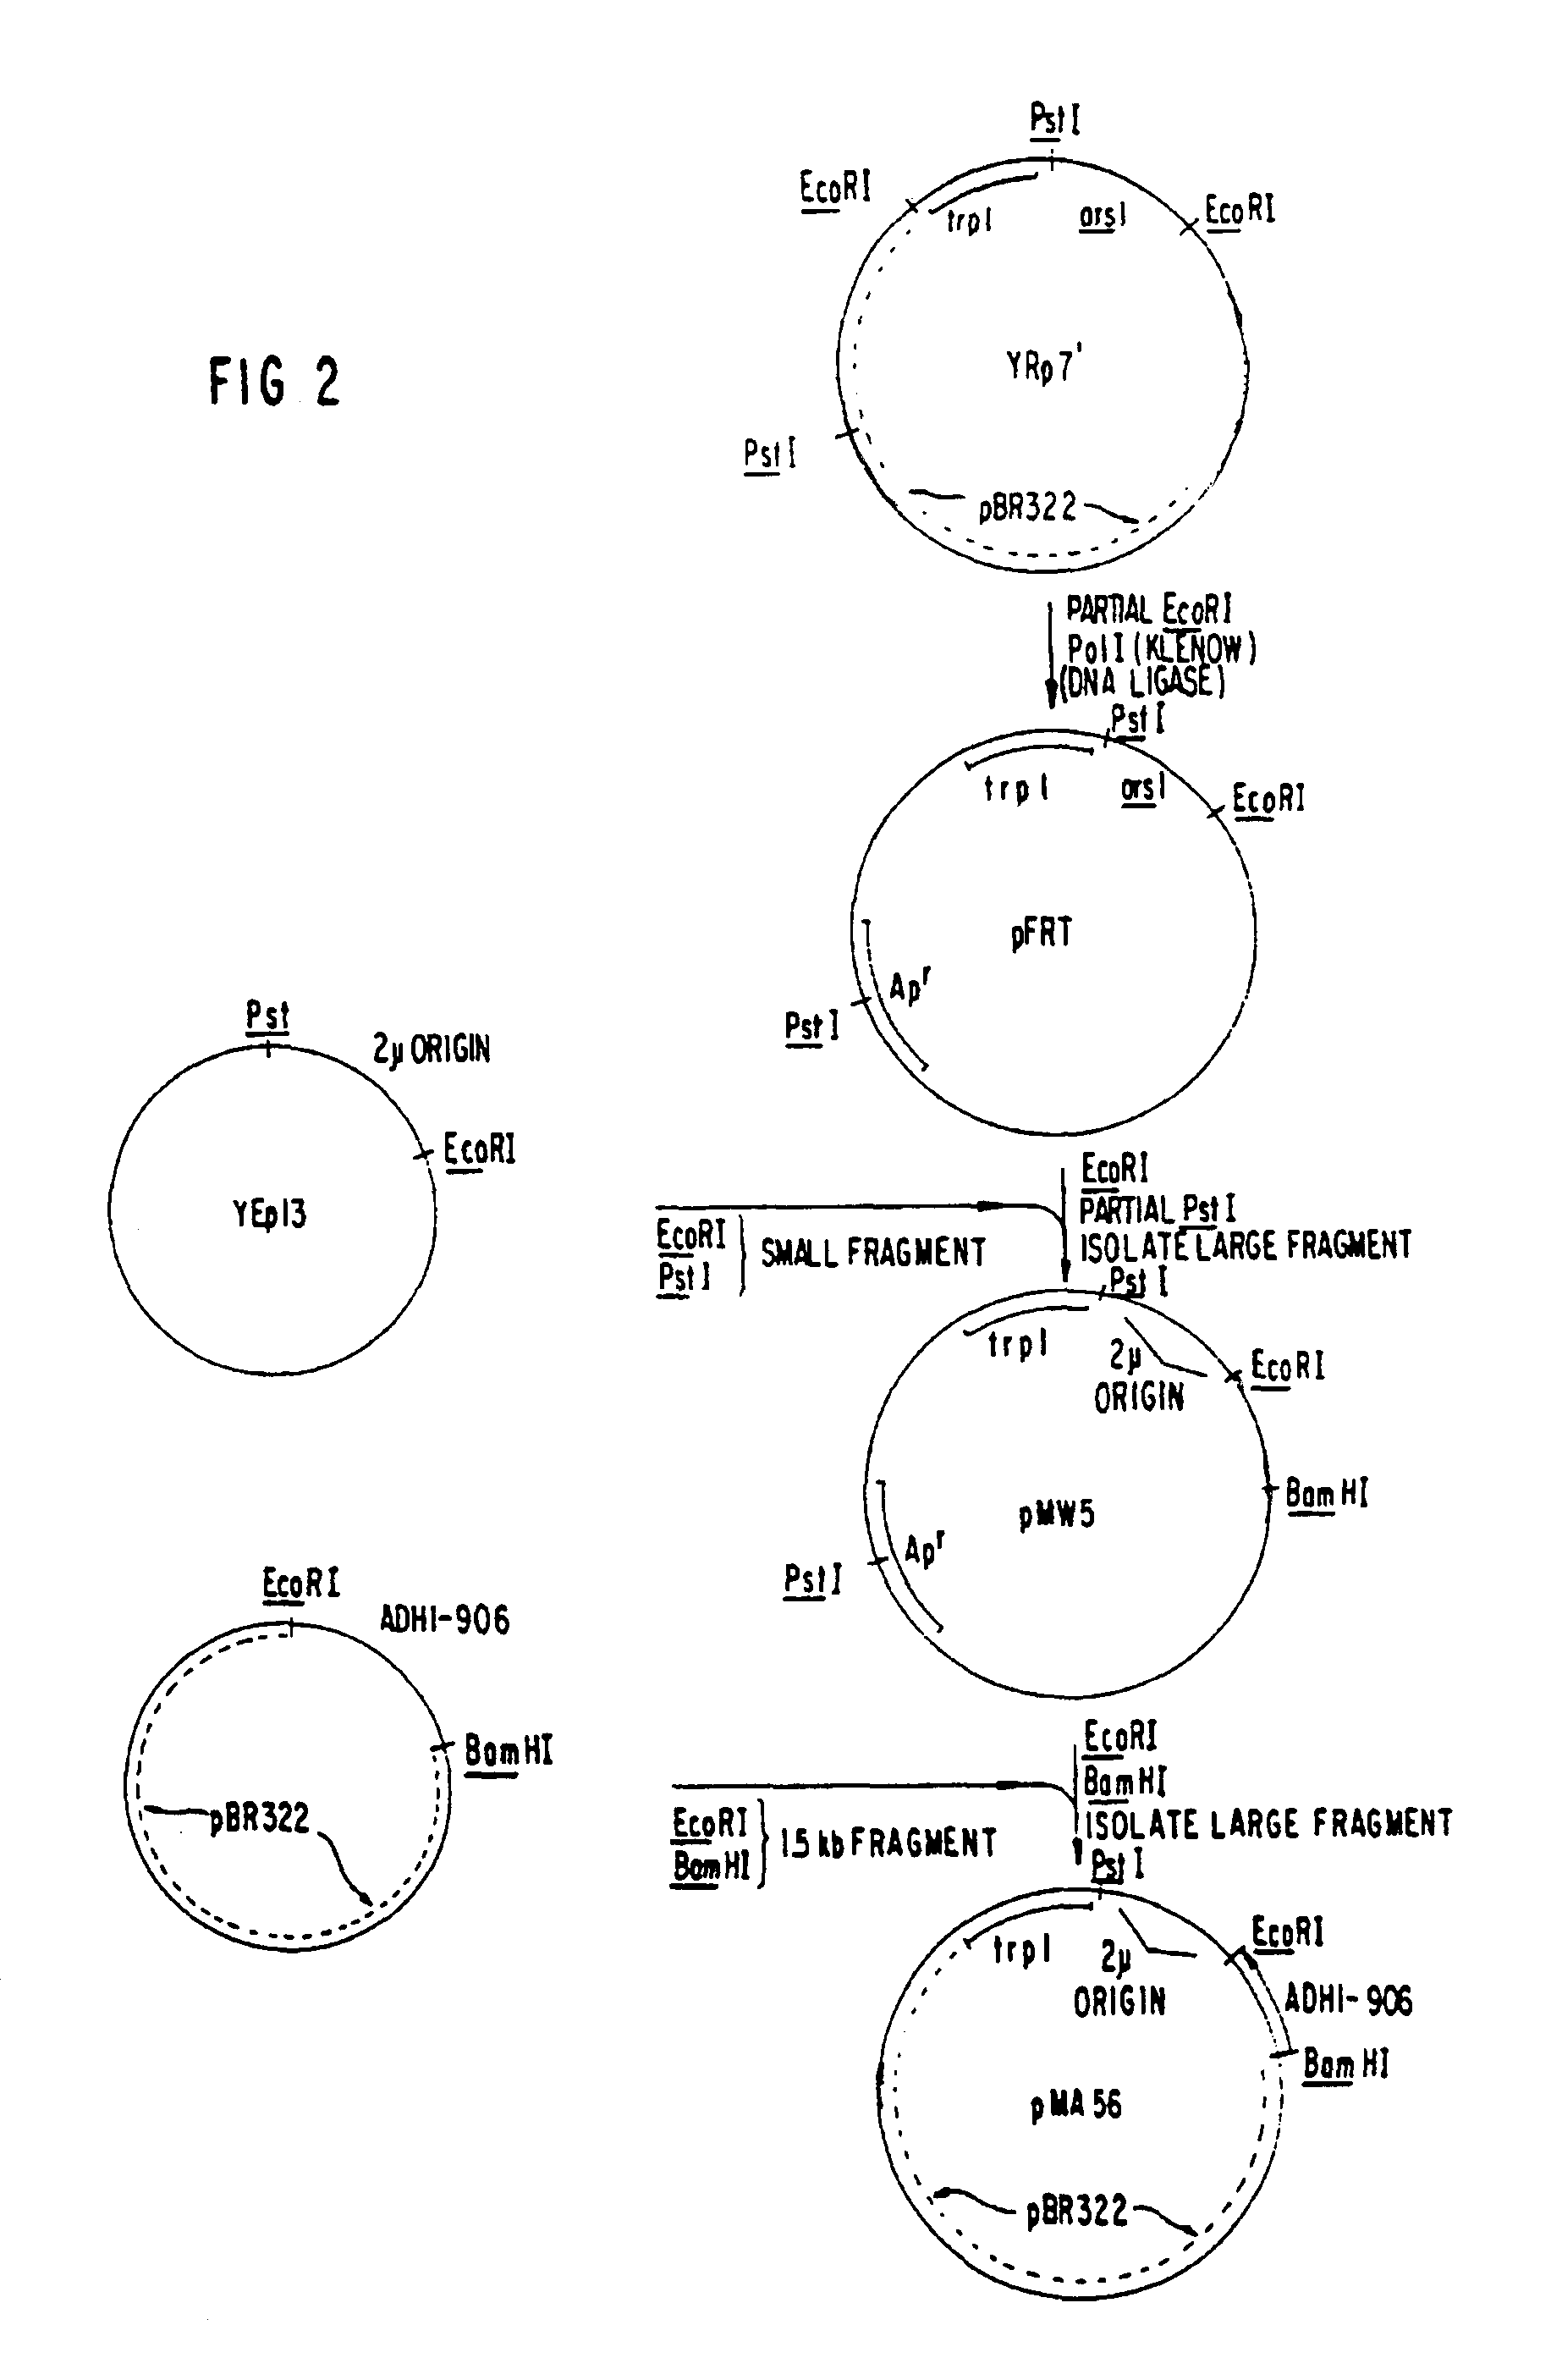 Synthesis of human virus antigens by yeast